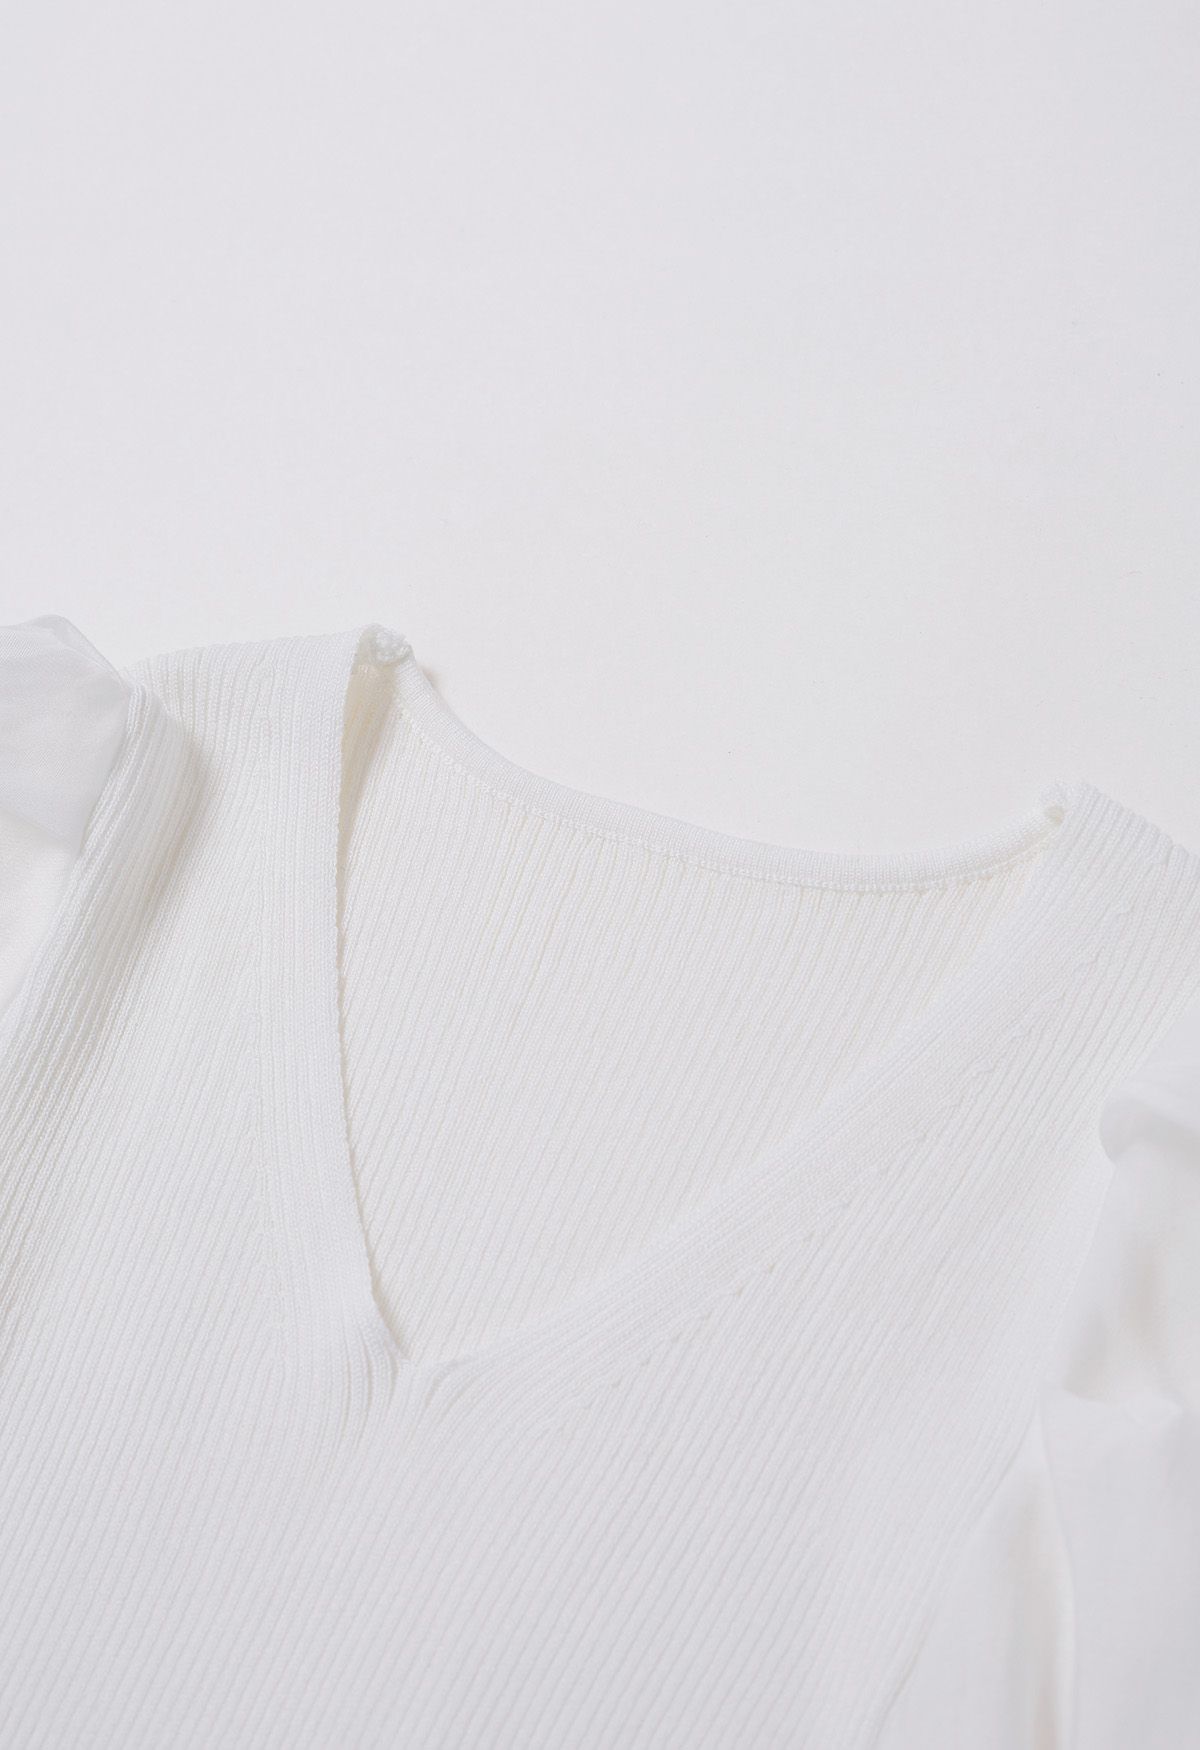 Dramatic Puff Sleeves V-Neck Spliced Knit Top in White